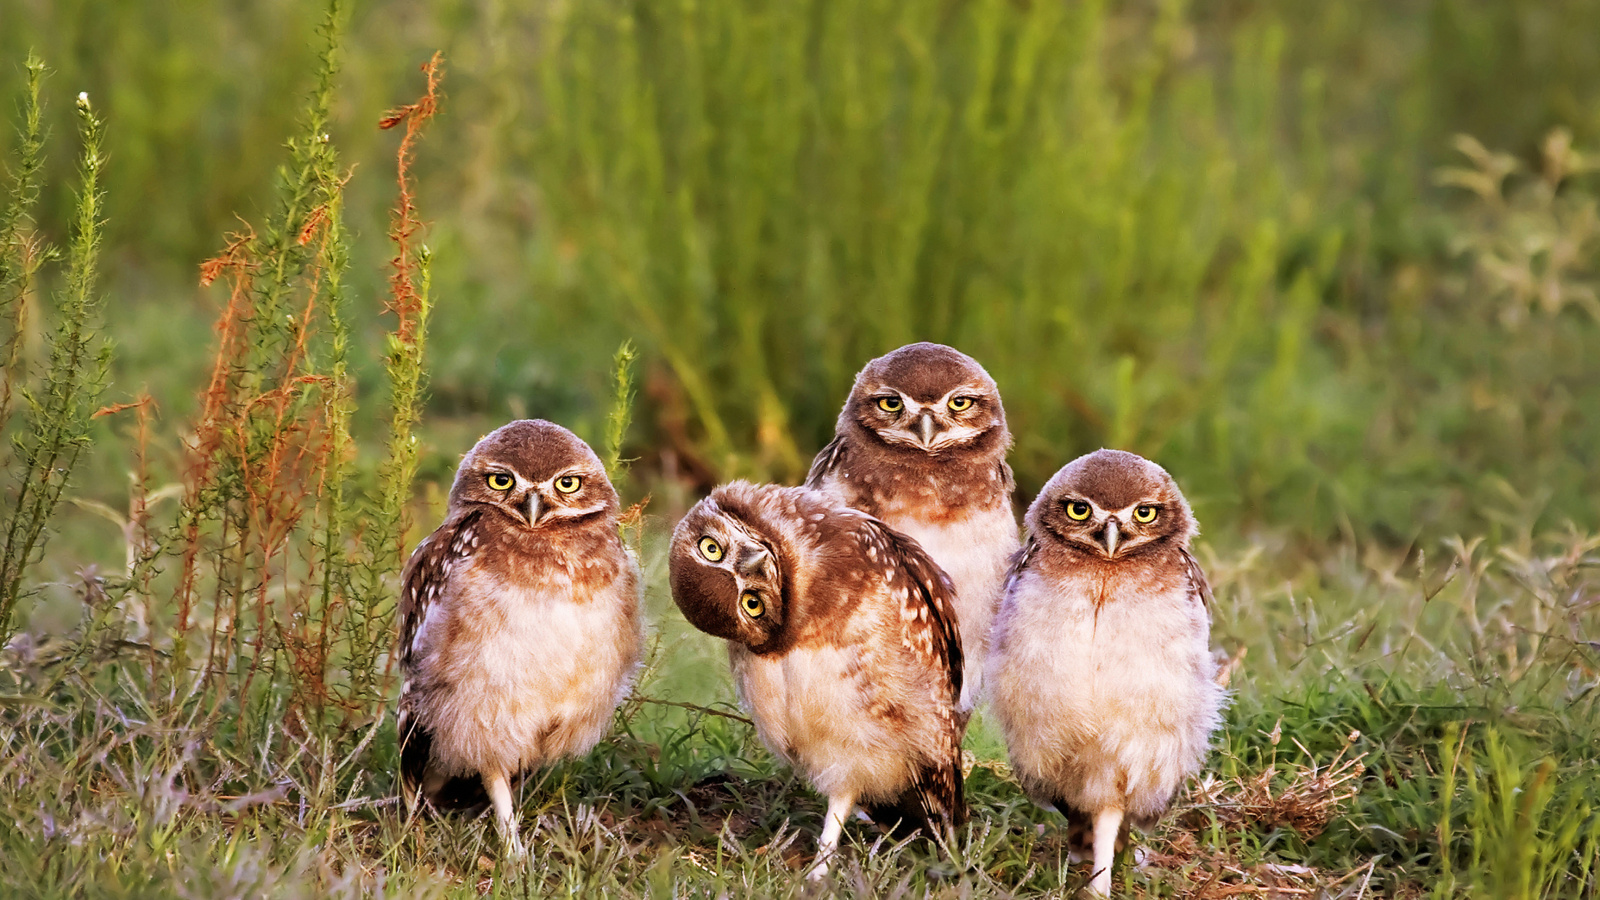 Das Morning with owls Wallpaper 1600x900